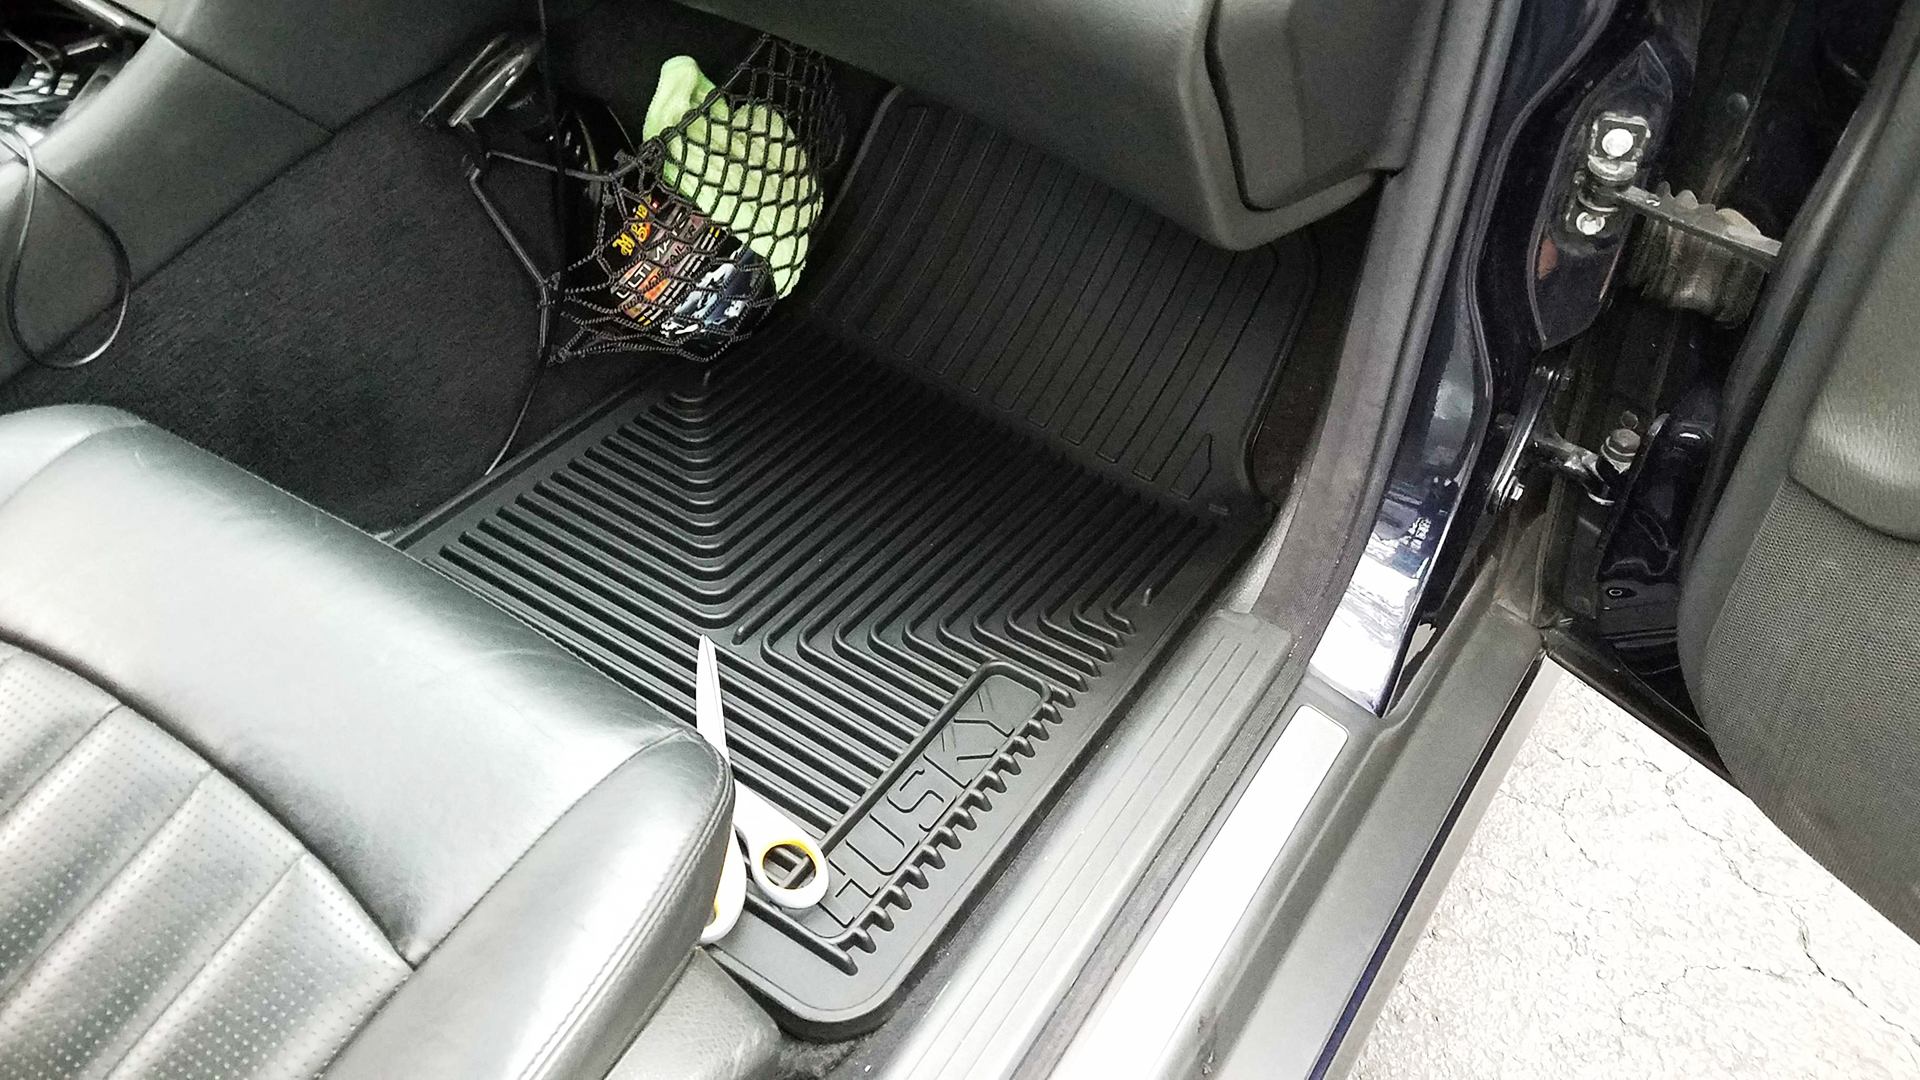 I Put Rubber Floor Mats in My Car 3 Years Ago. I Haven't Looked